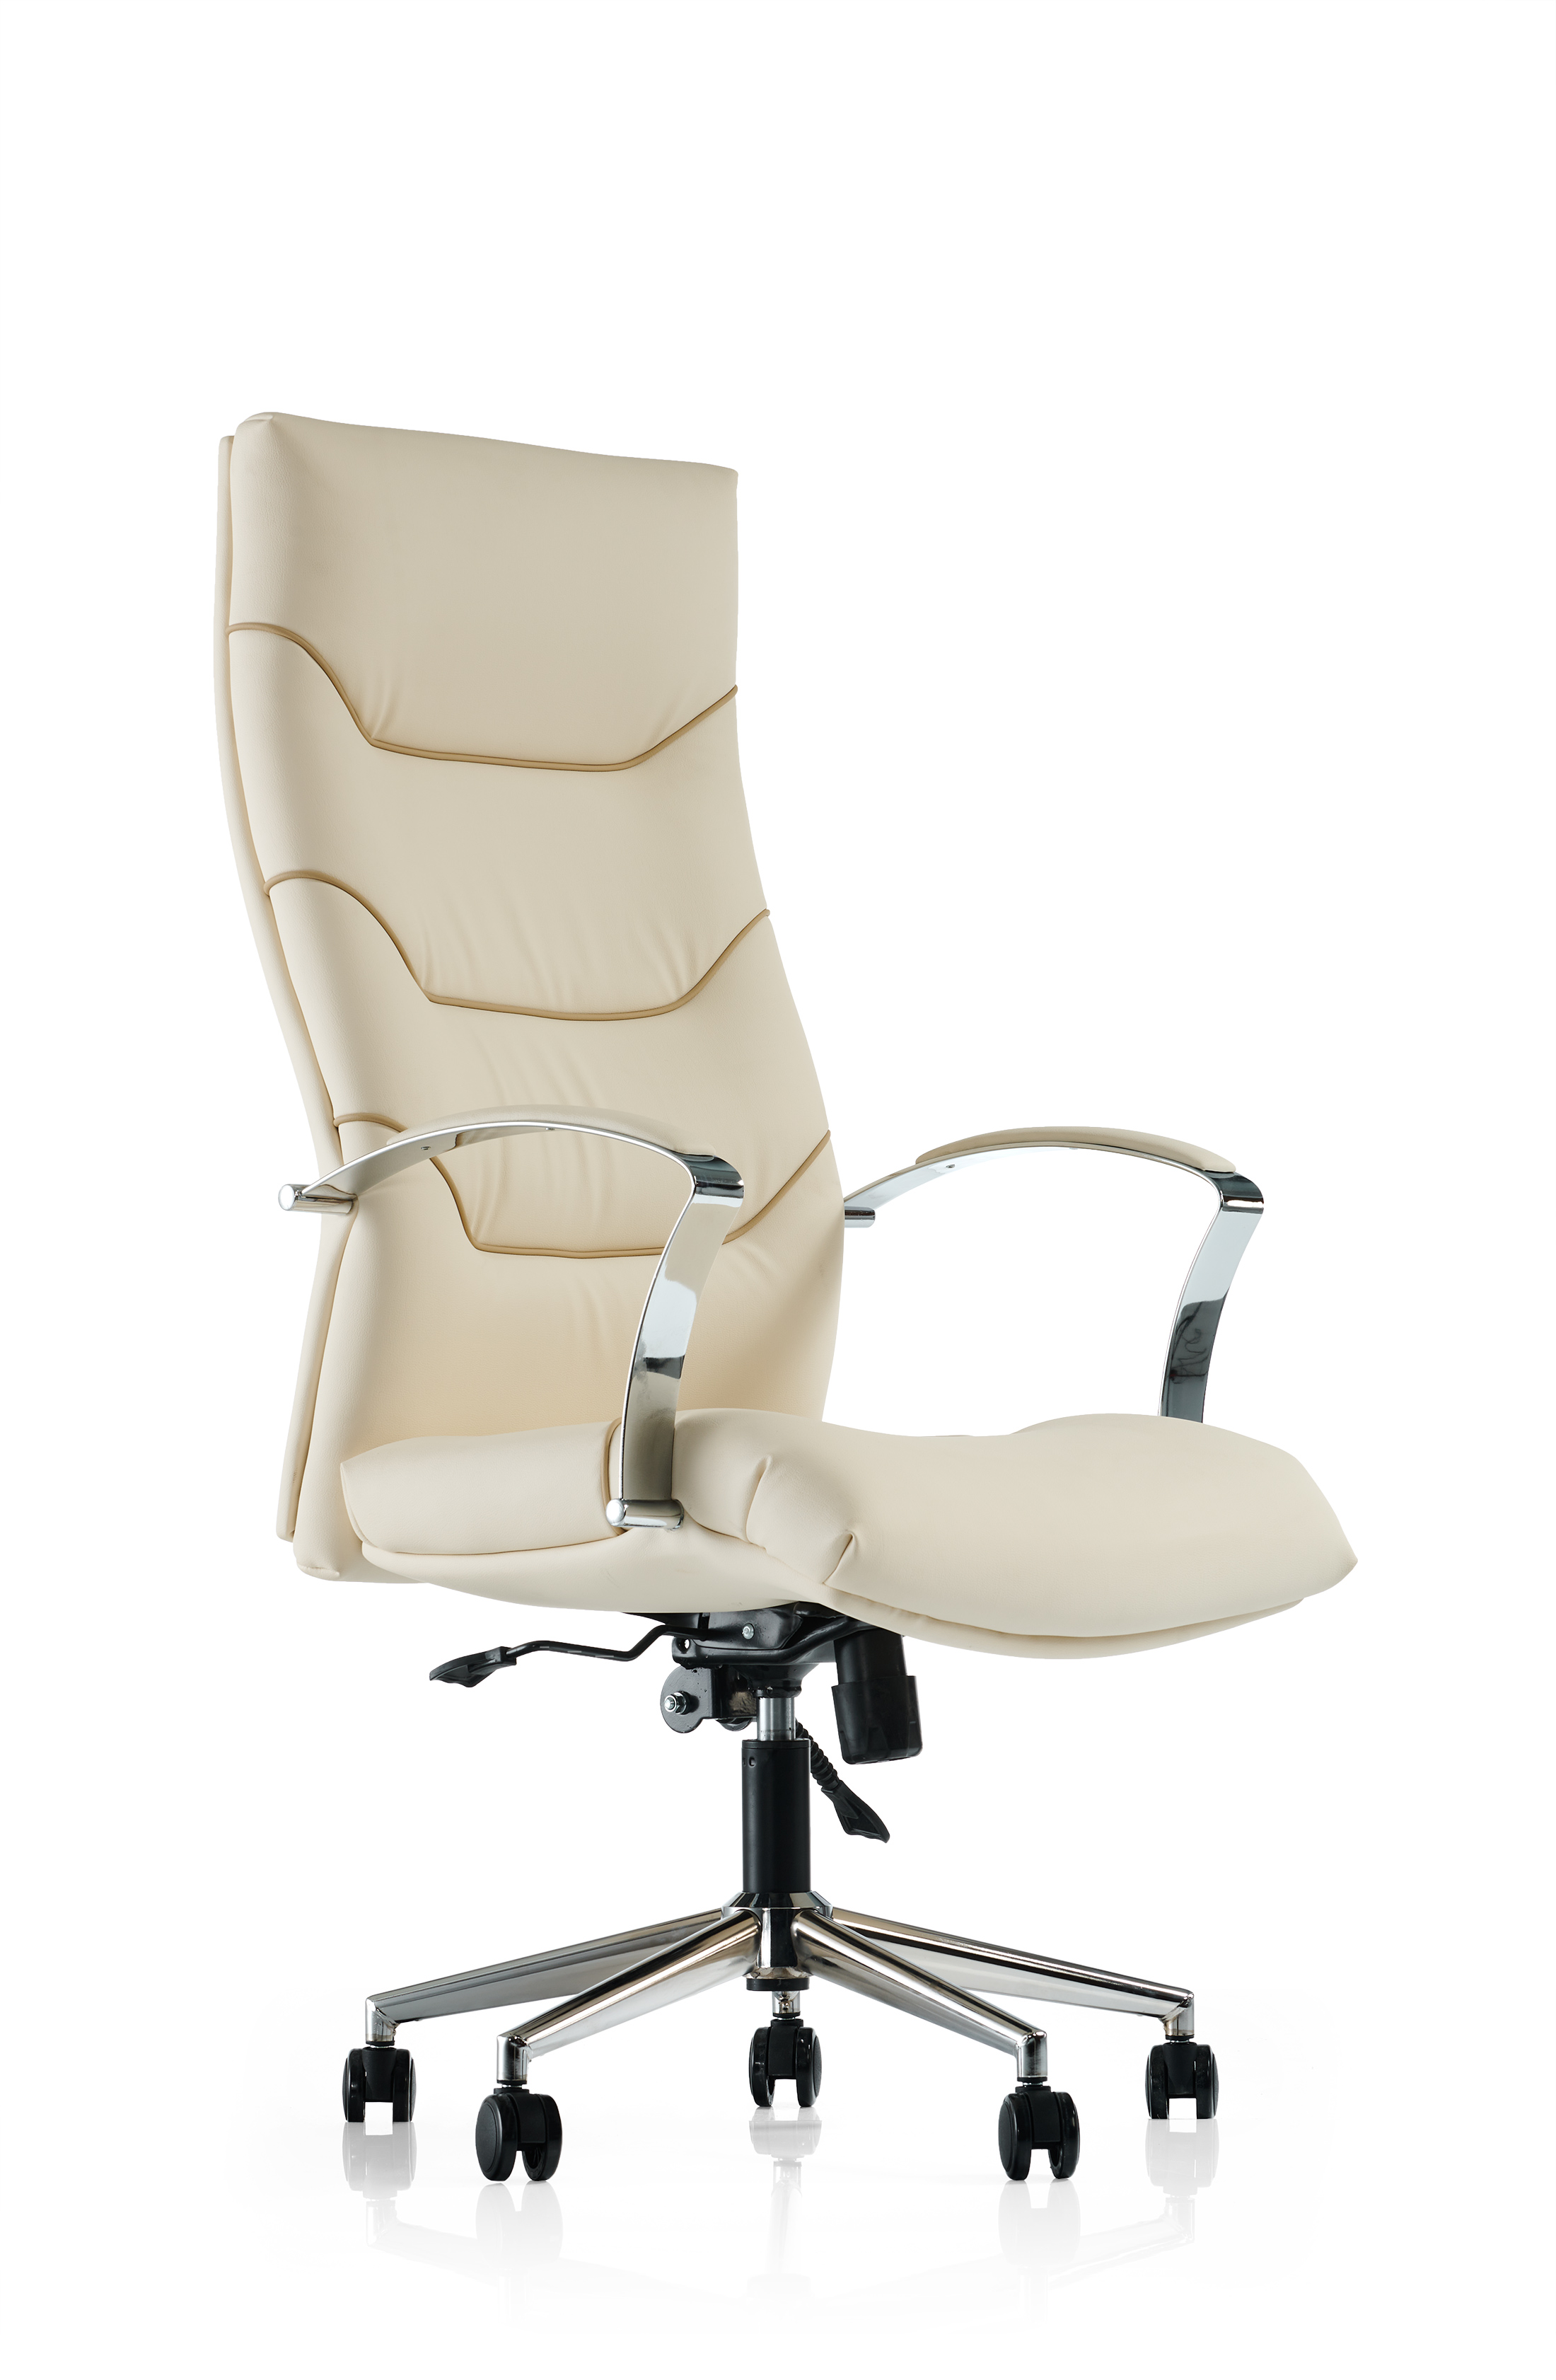 PIEDRA 000C MANAGER CHAIR